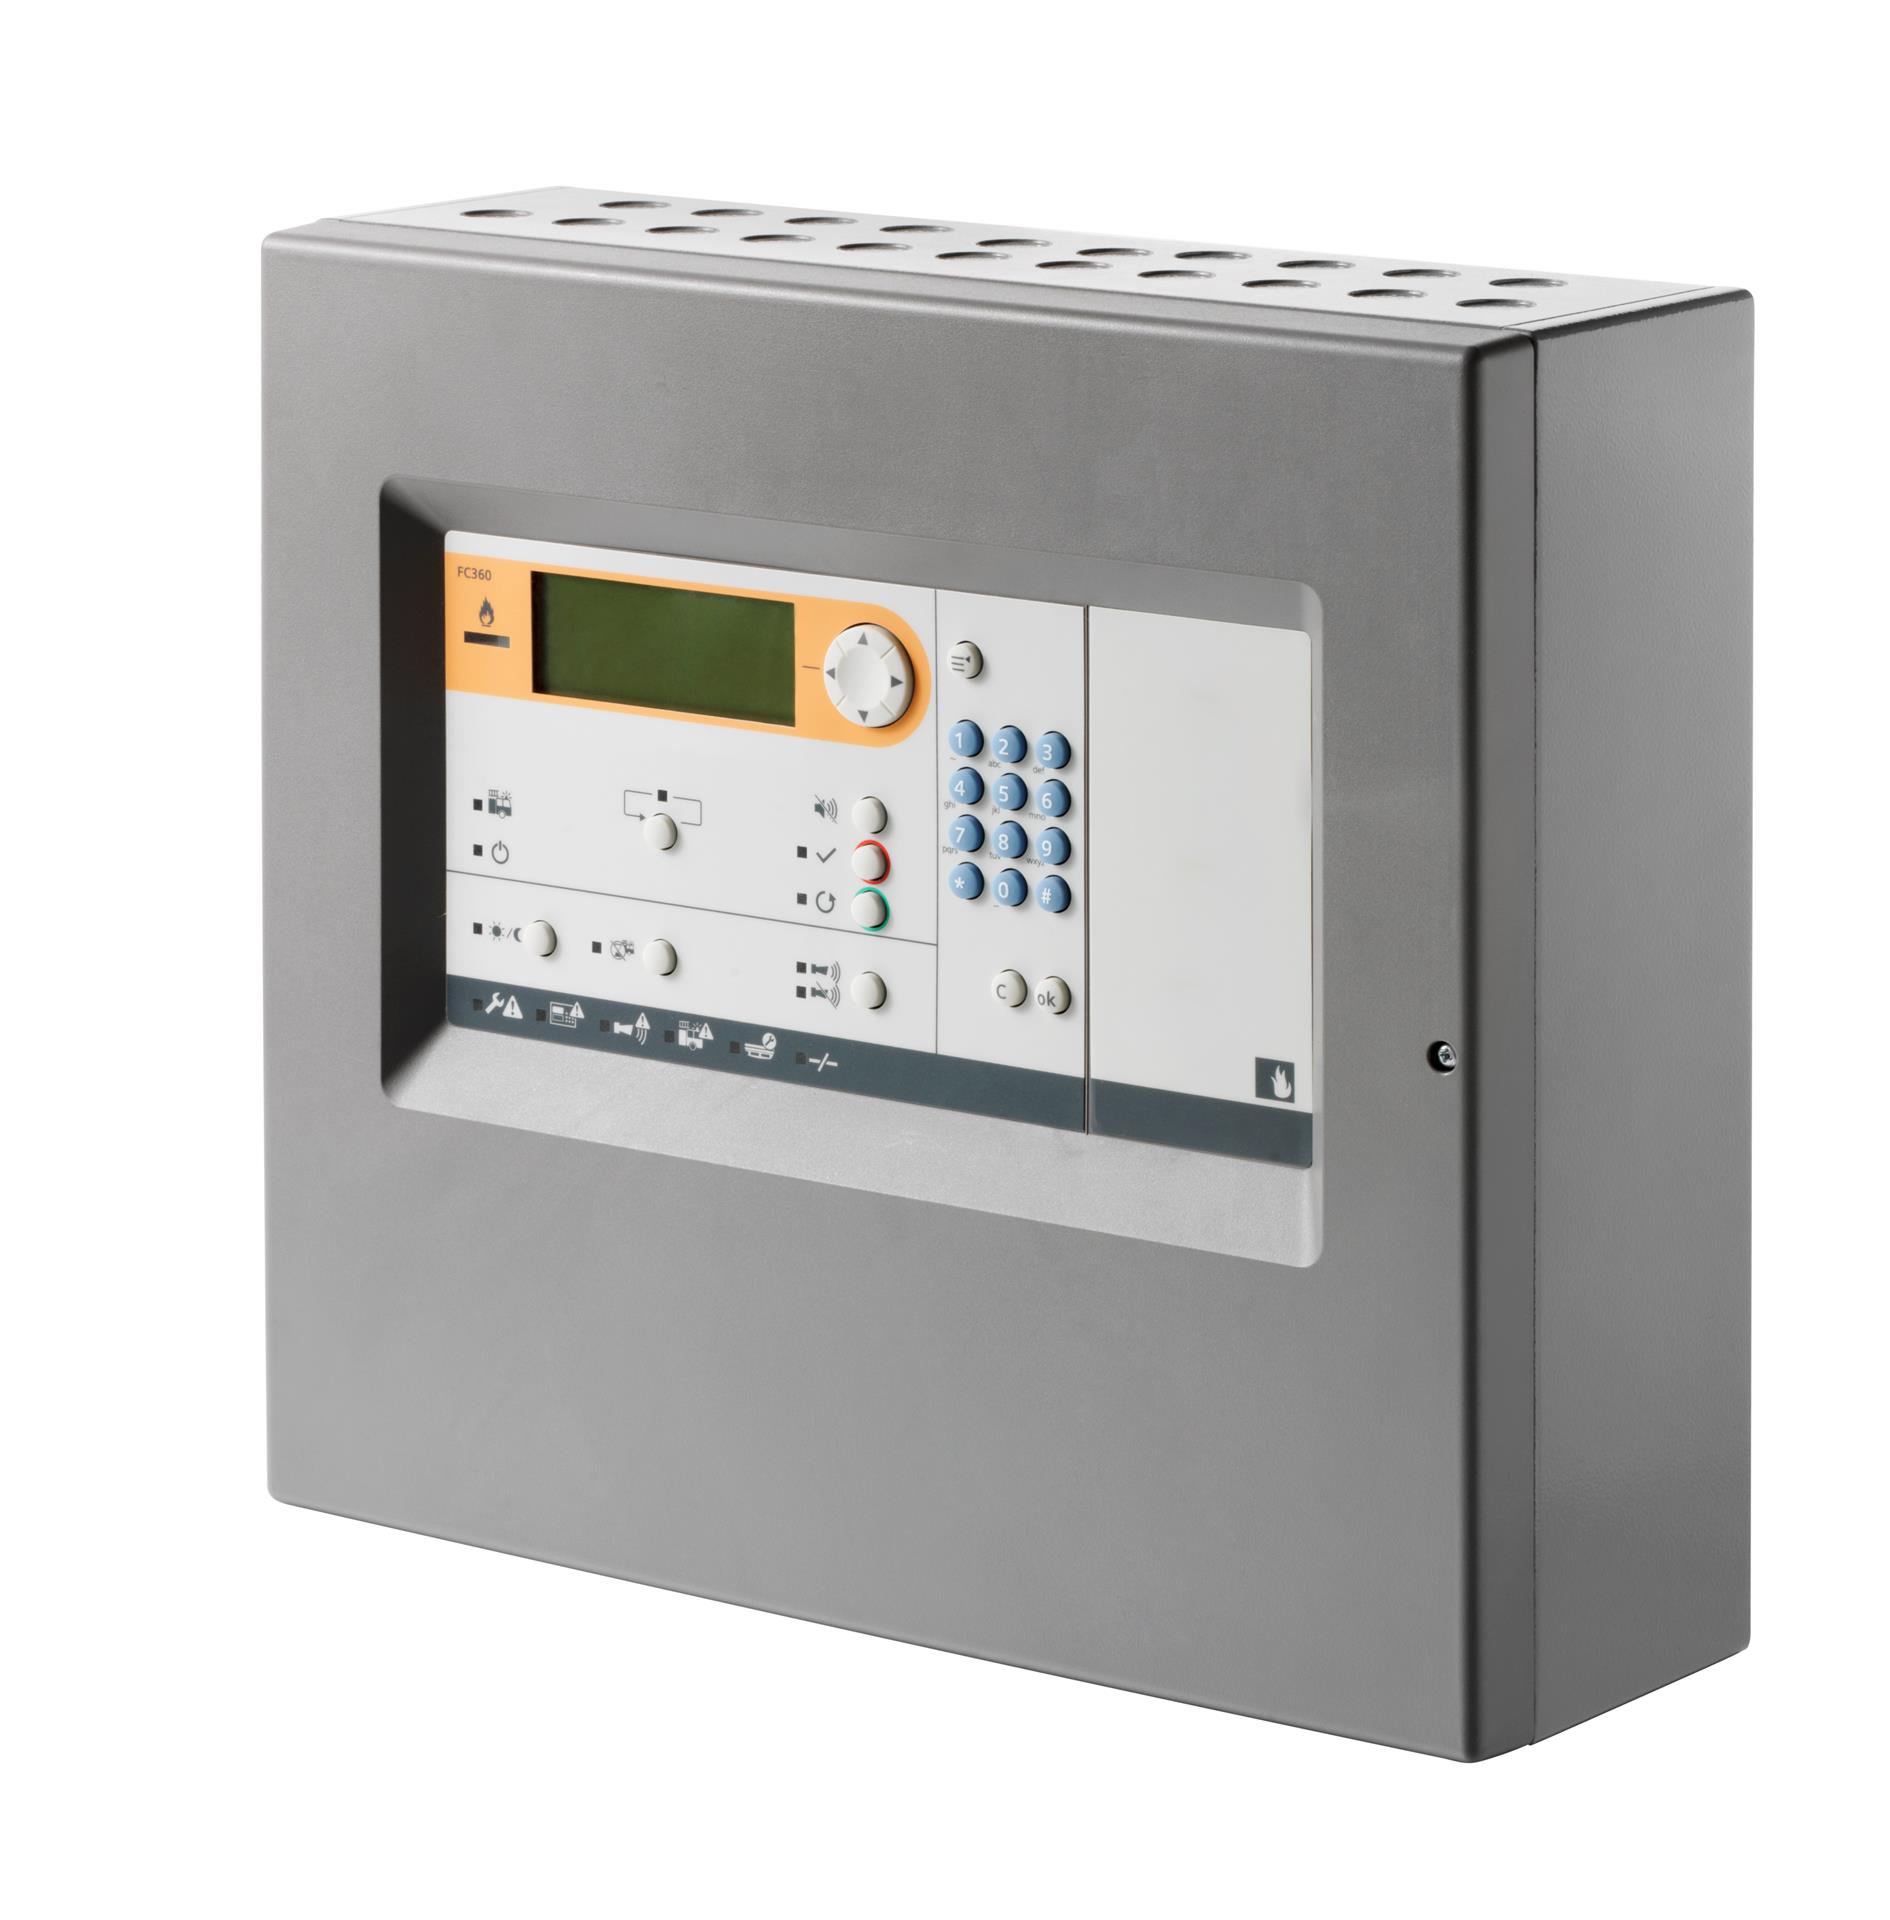 SIEMENS FC361-ZZ Cerberus FIT Interactive Fire Detection and Alarm Control Panel – Compact Case (1 loop, 126 addresses)